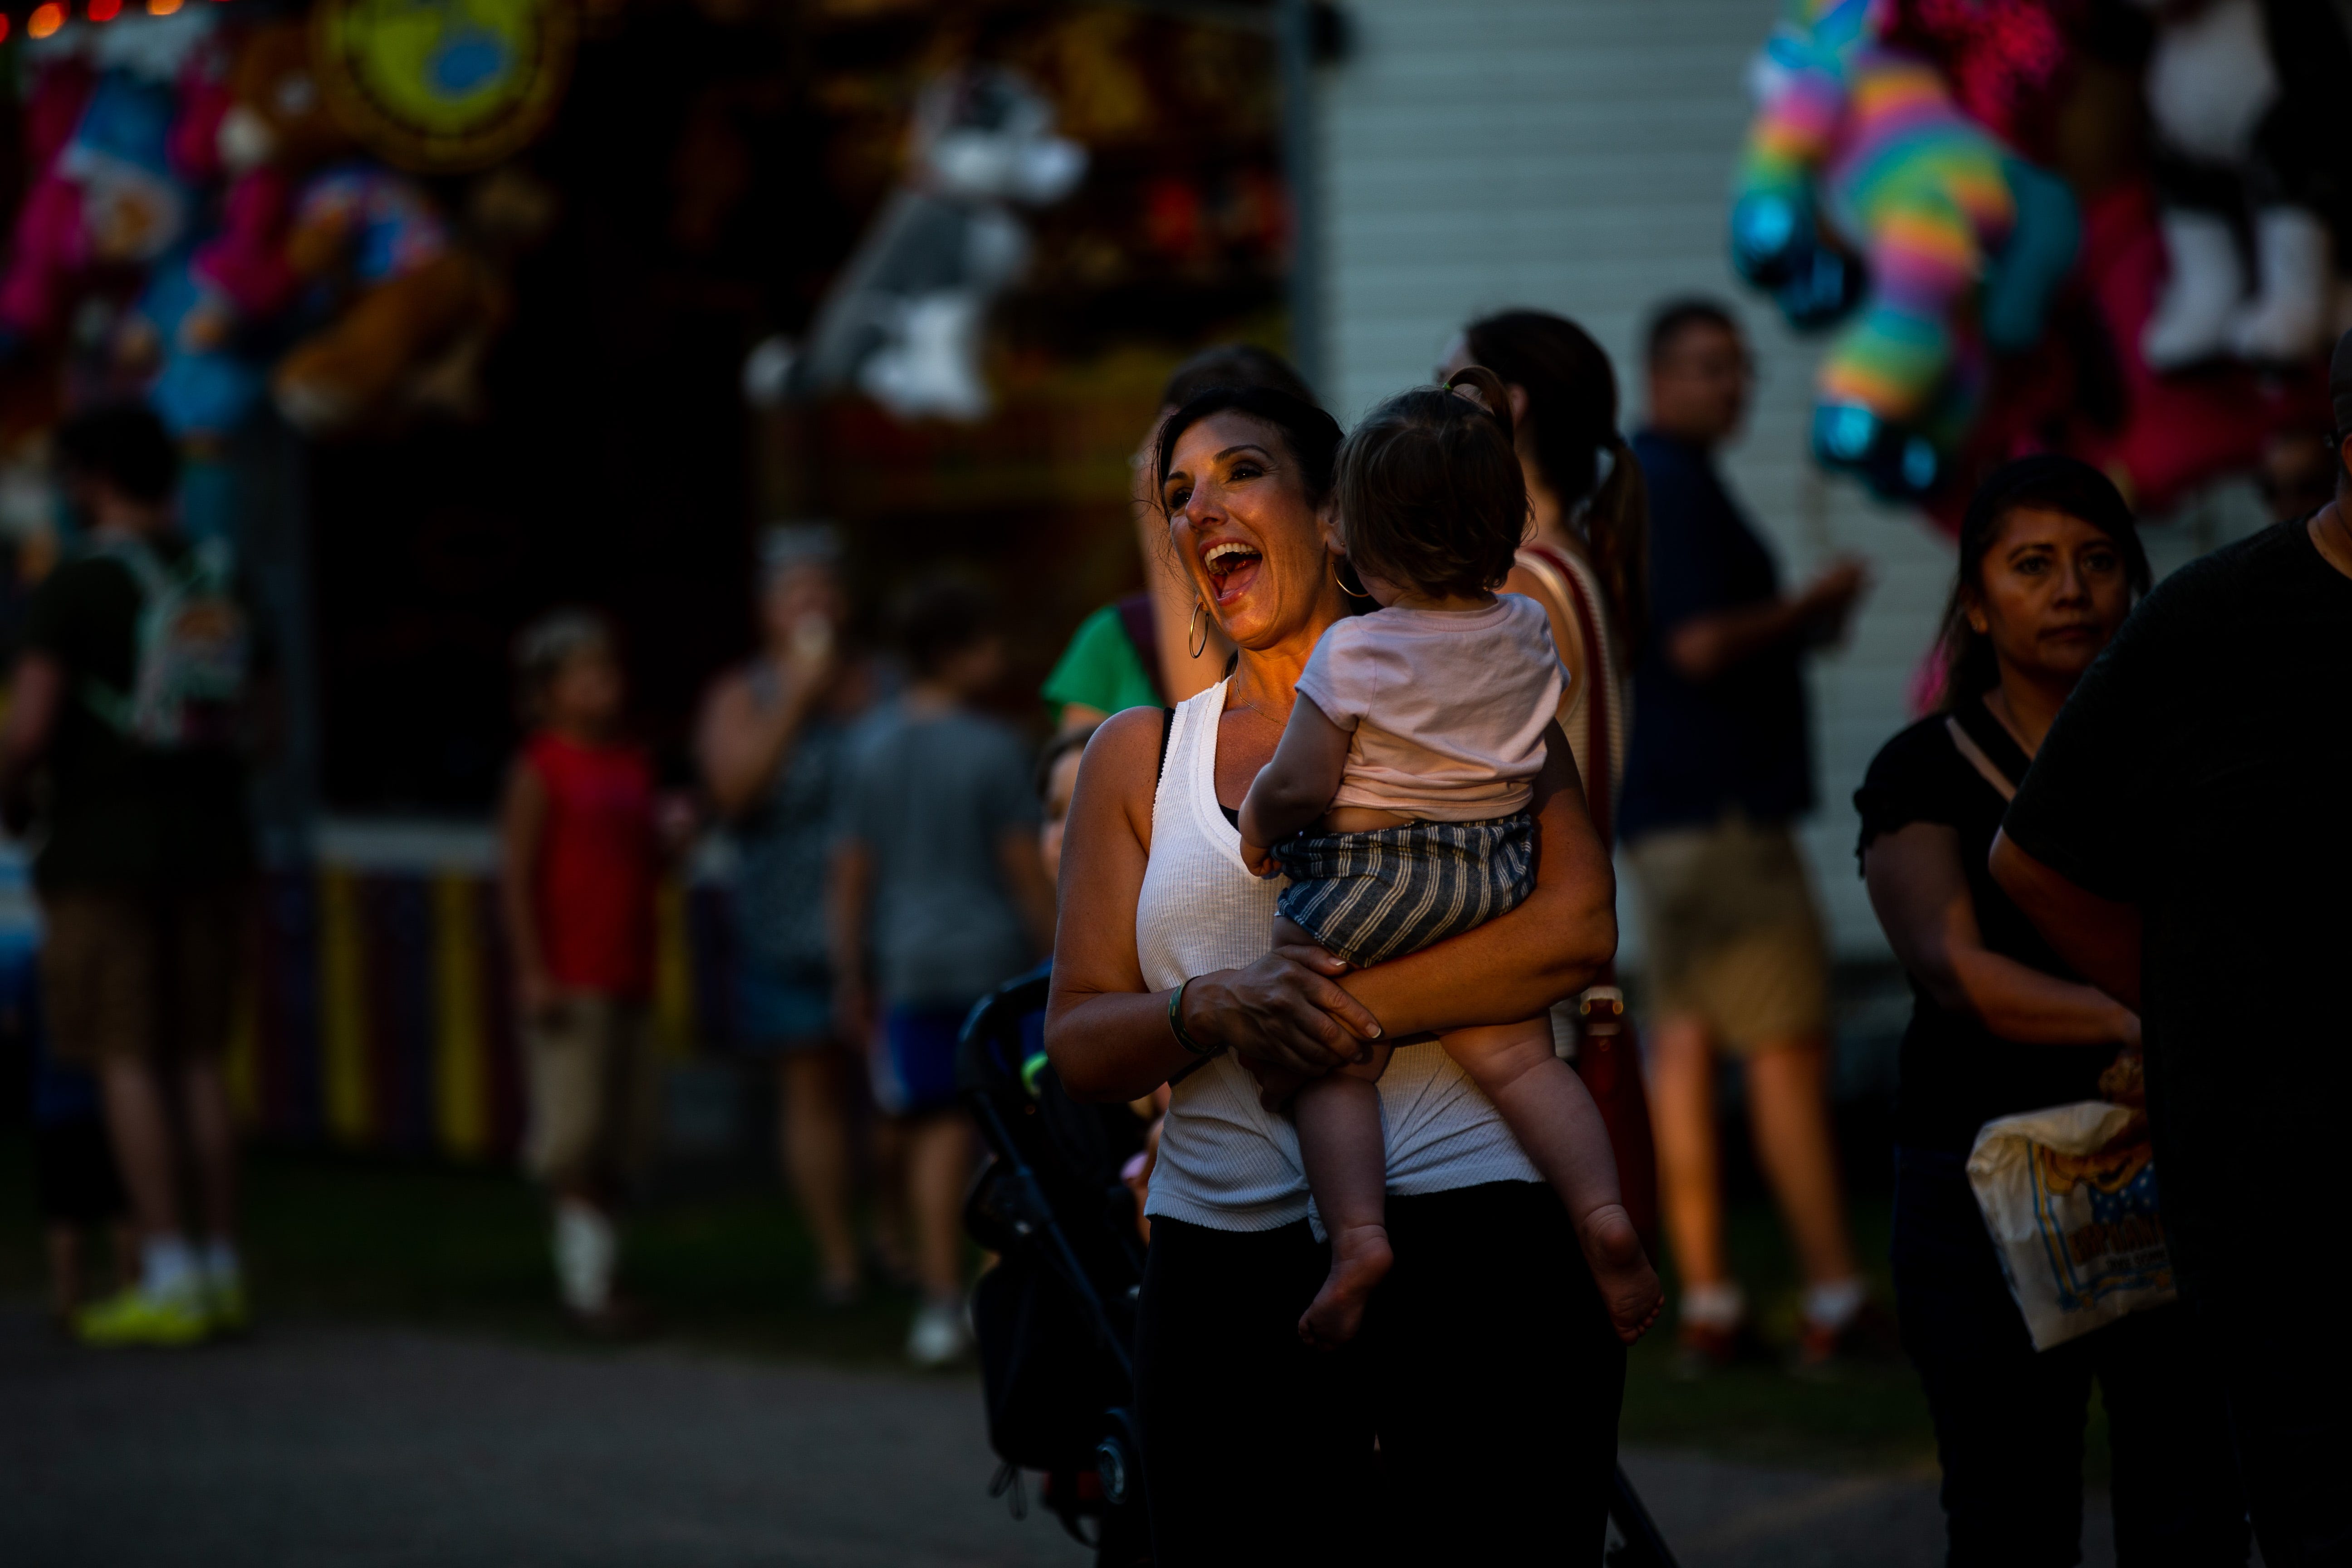 Scenes from the Ottawa County Fair as thousands enjoy a week of rides, food and entertainment Wednesday, July 27, 2022, at the Ottawa County Fairgrounds.